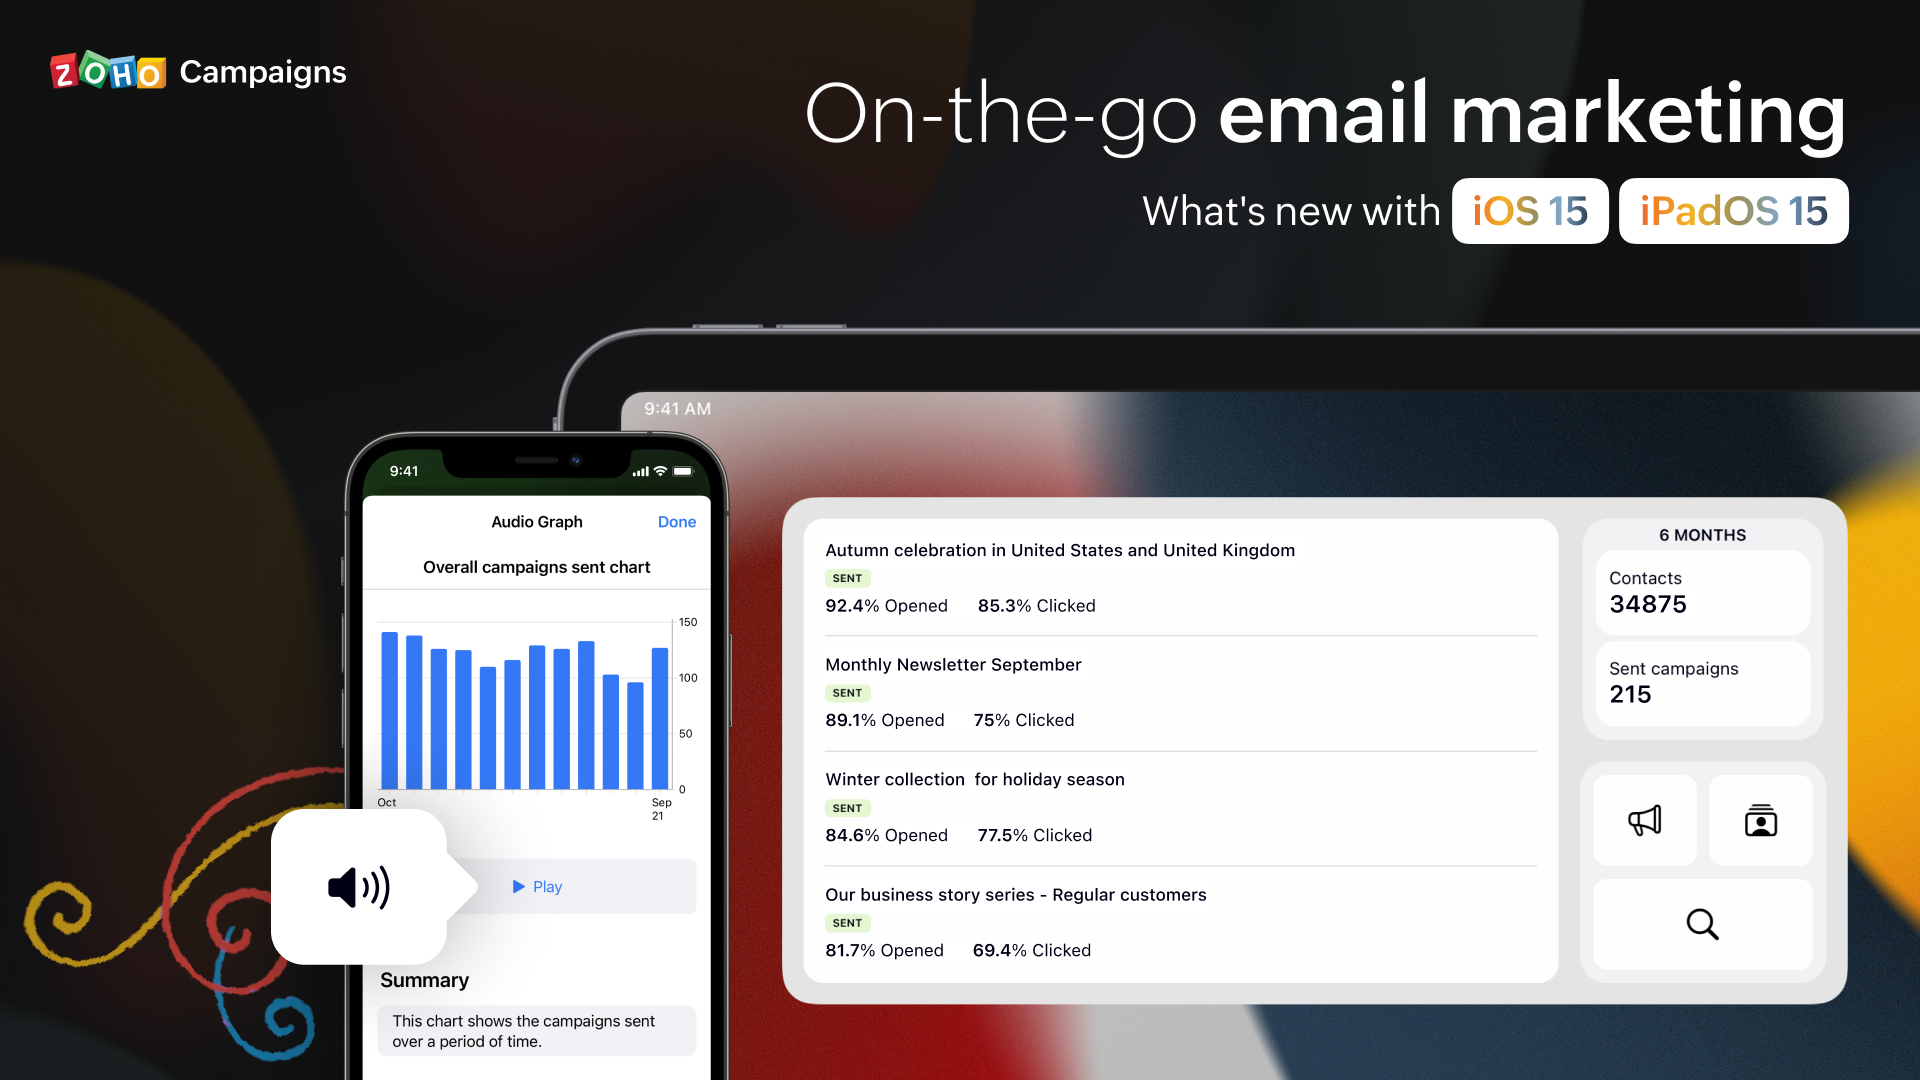 On-the-go email marketing—What's new with Apple's latest iOS 15 and iPadOS 15